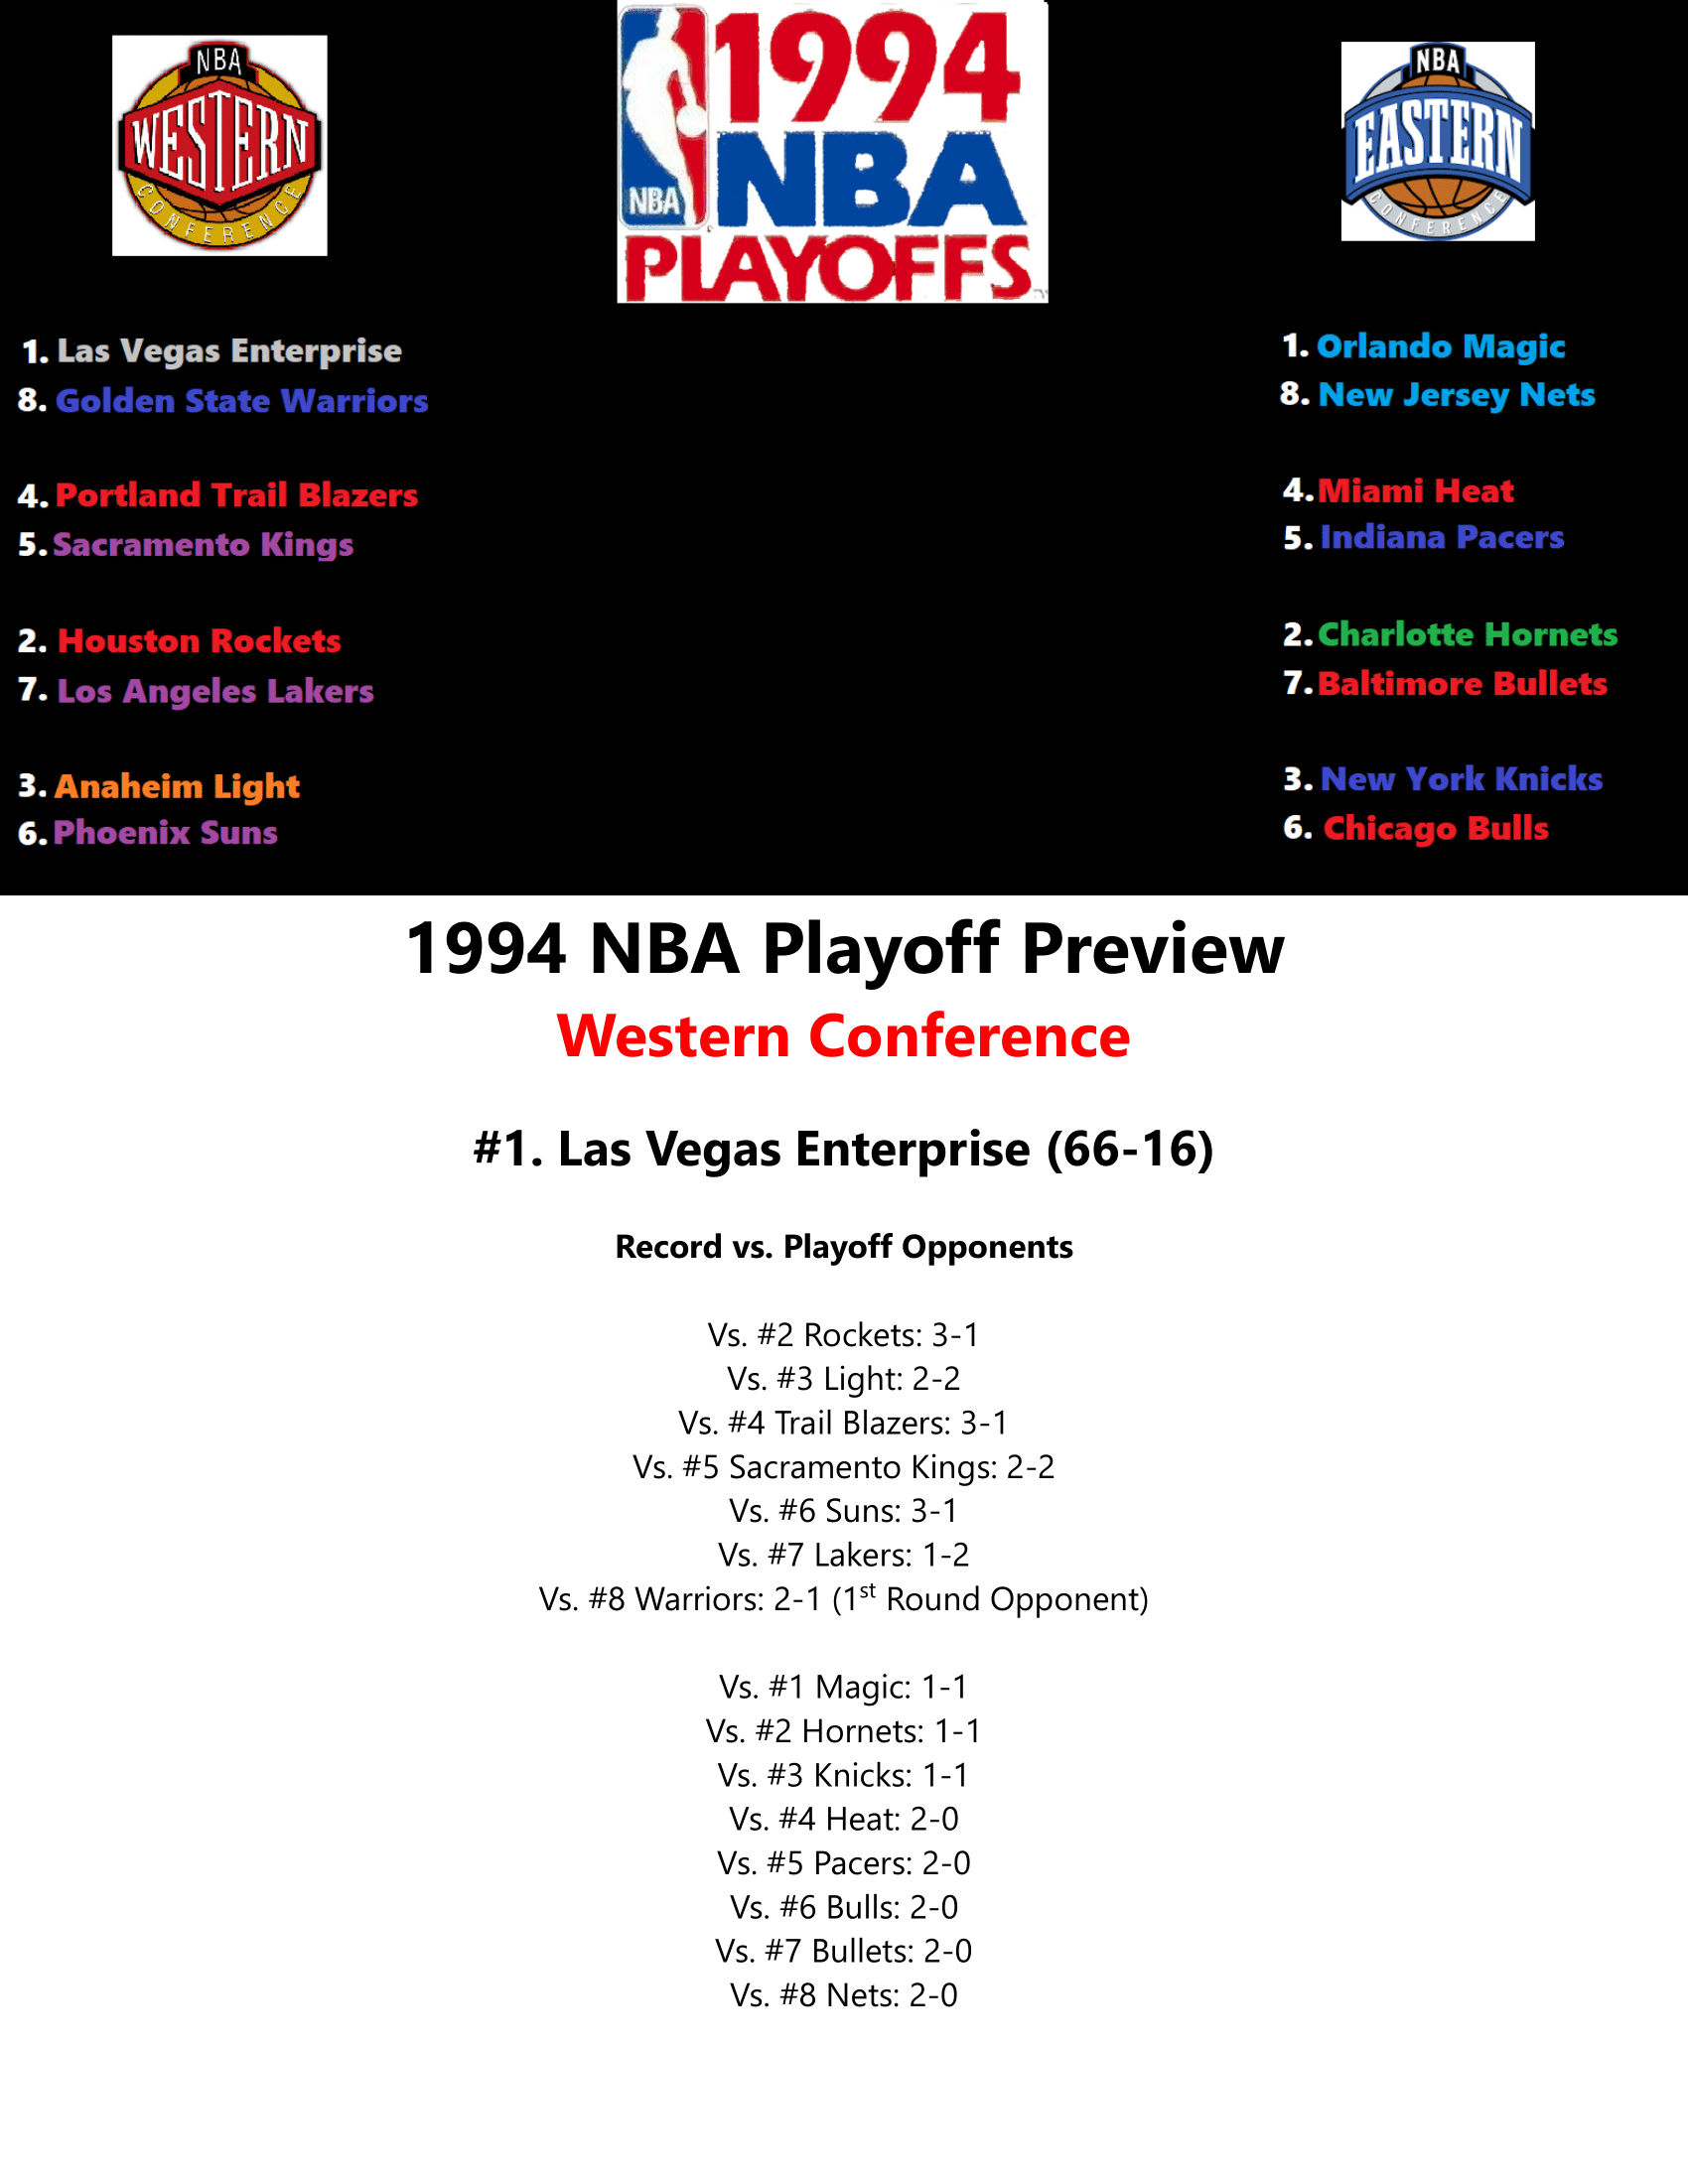 93-94-Part-4-Playoff-Preview-01.png